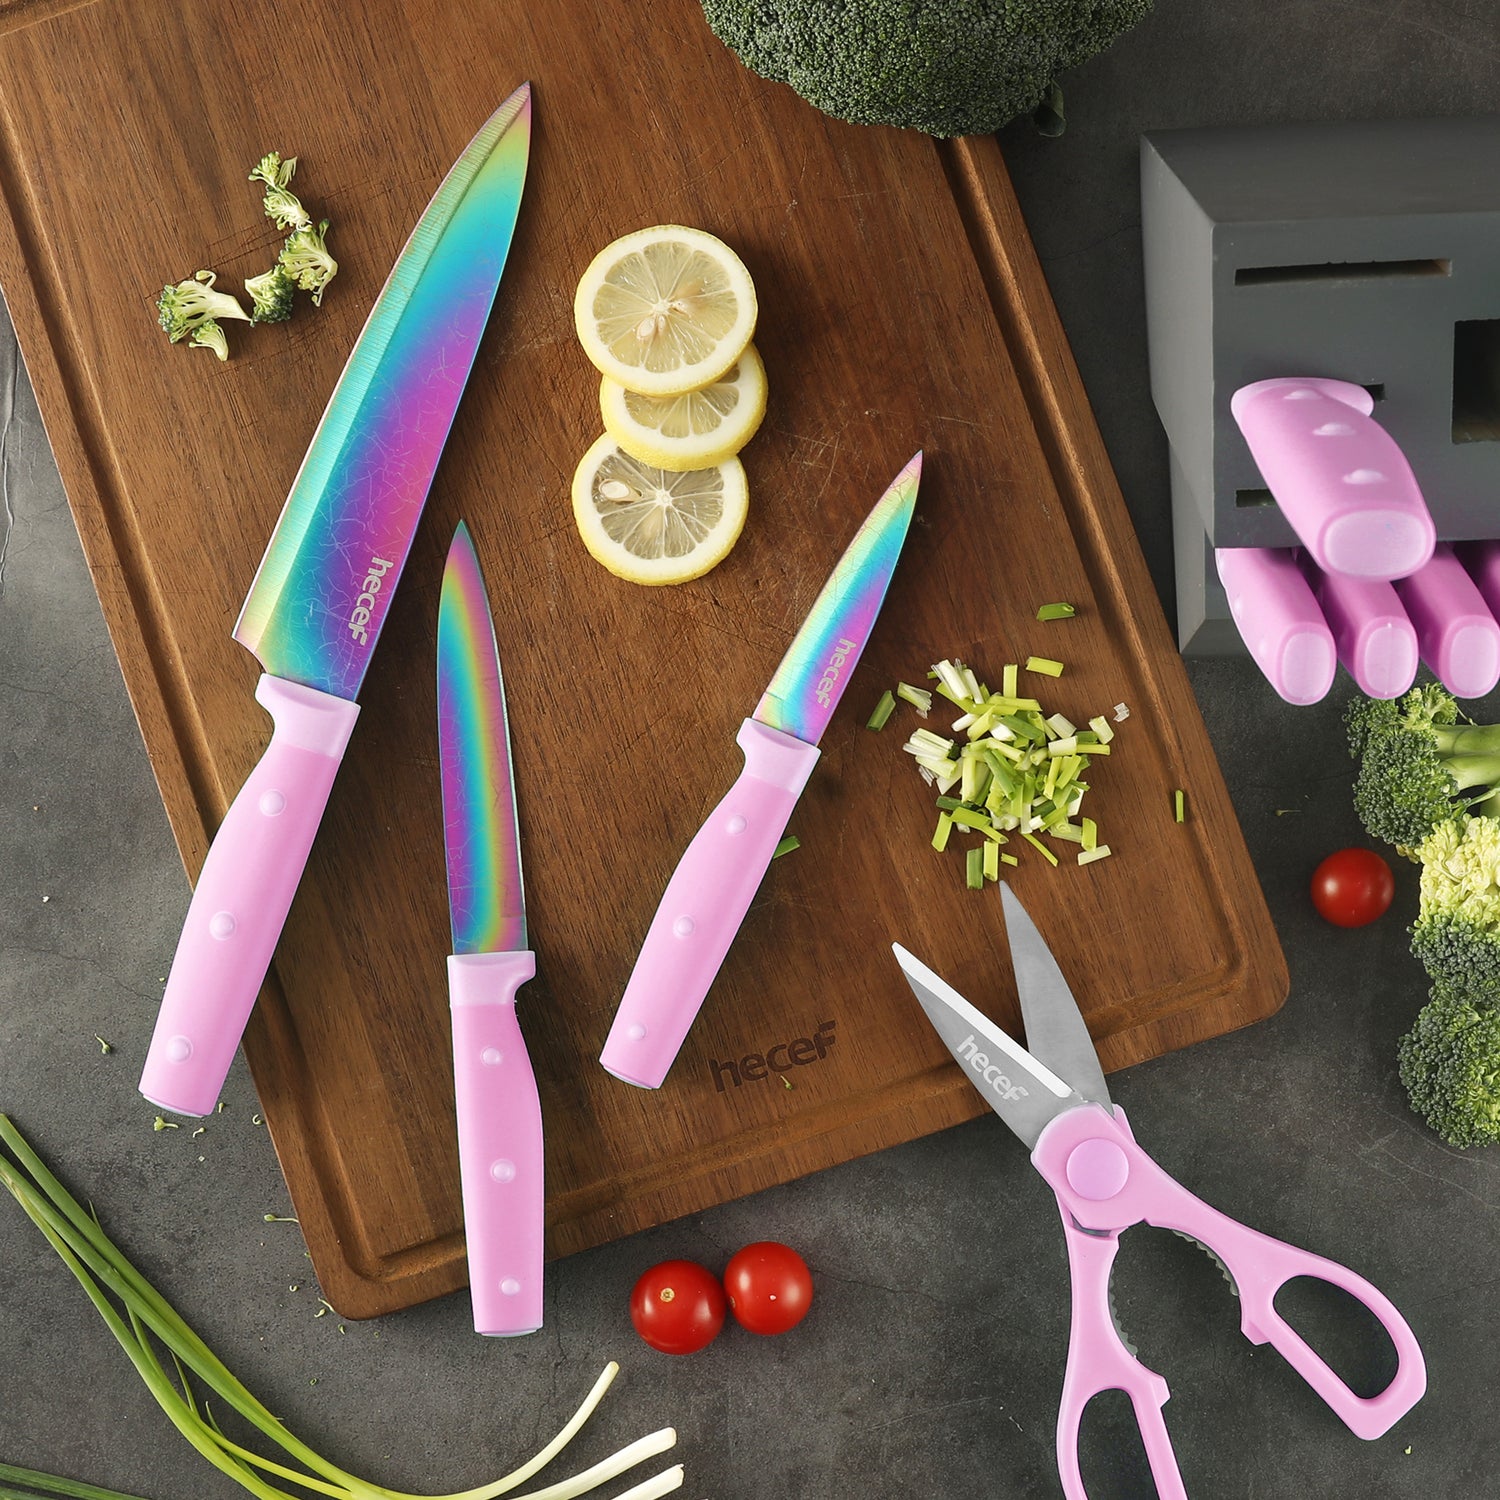 Aiheal Knife Set, 16 Pieces High Carbon Stainless Steel Rainbow